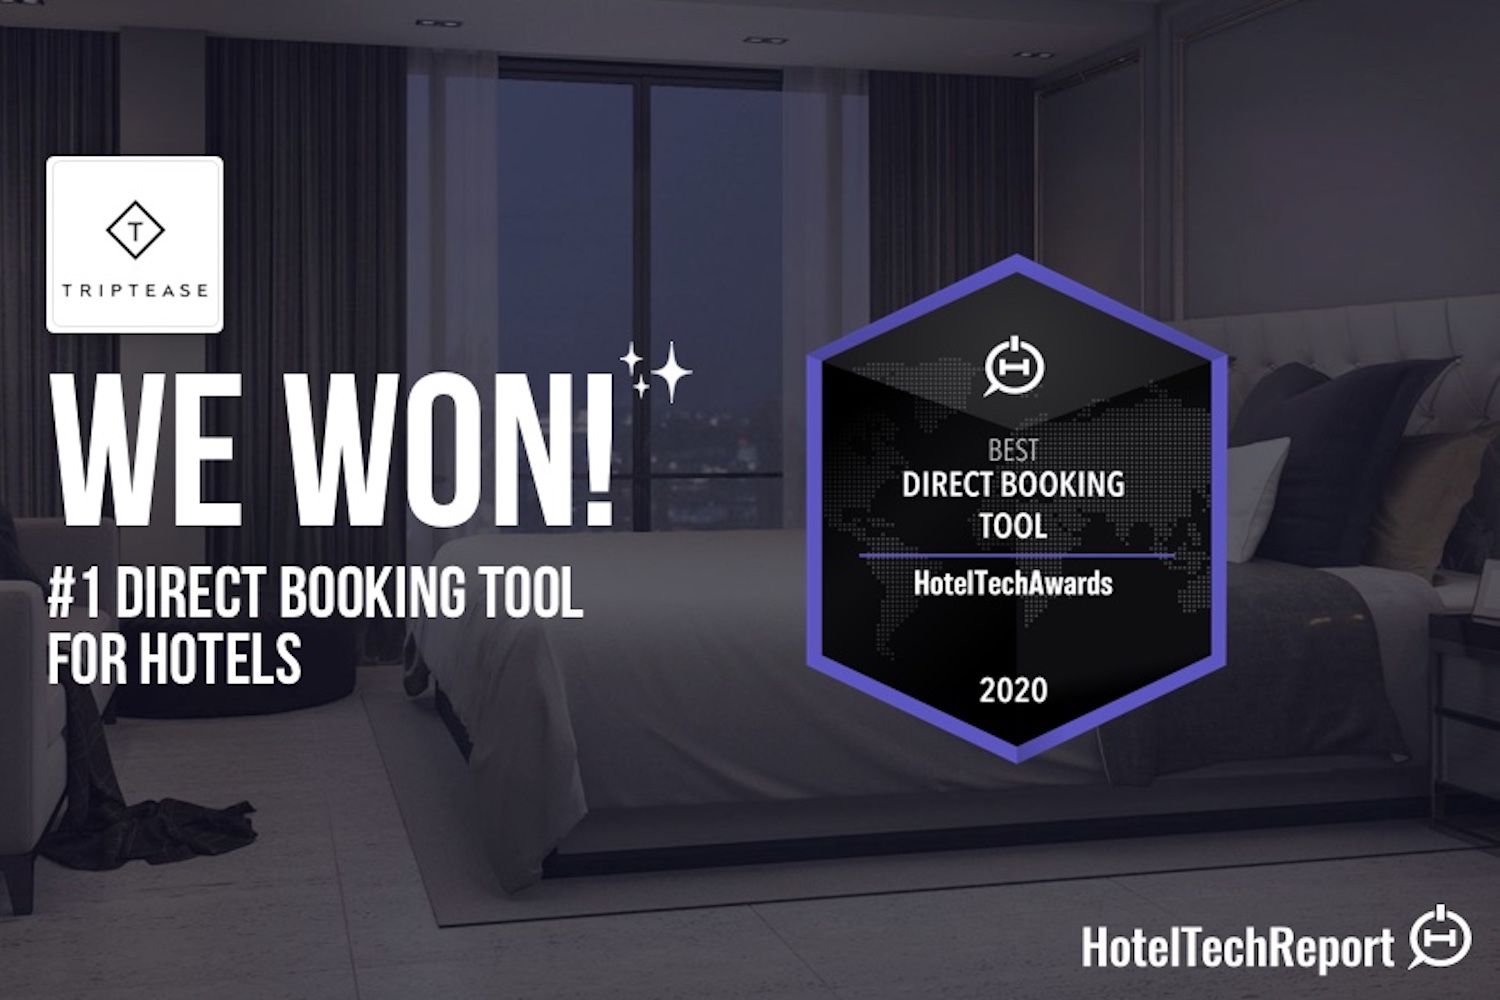 Triptease wins 'Best Direct Booking Tools' at the Hotel Tech Awards 2020